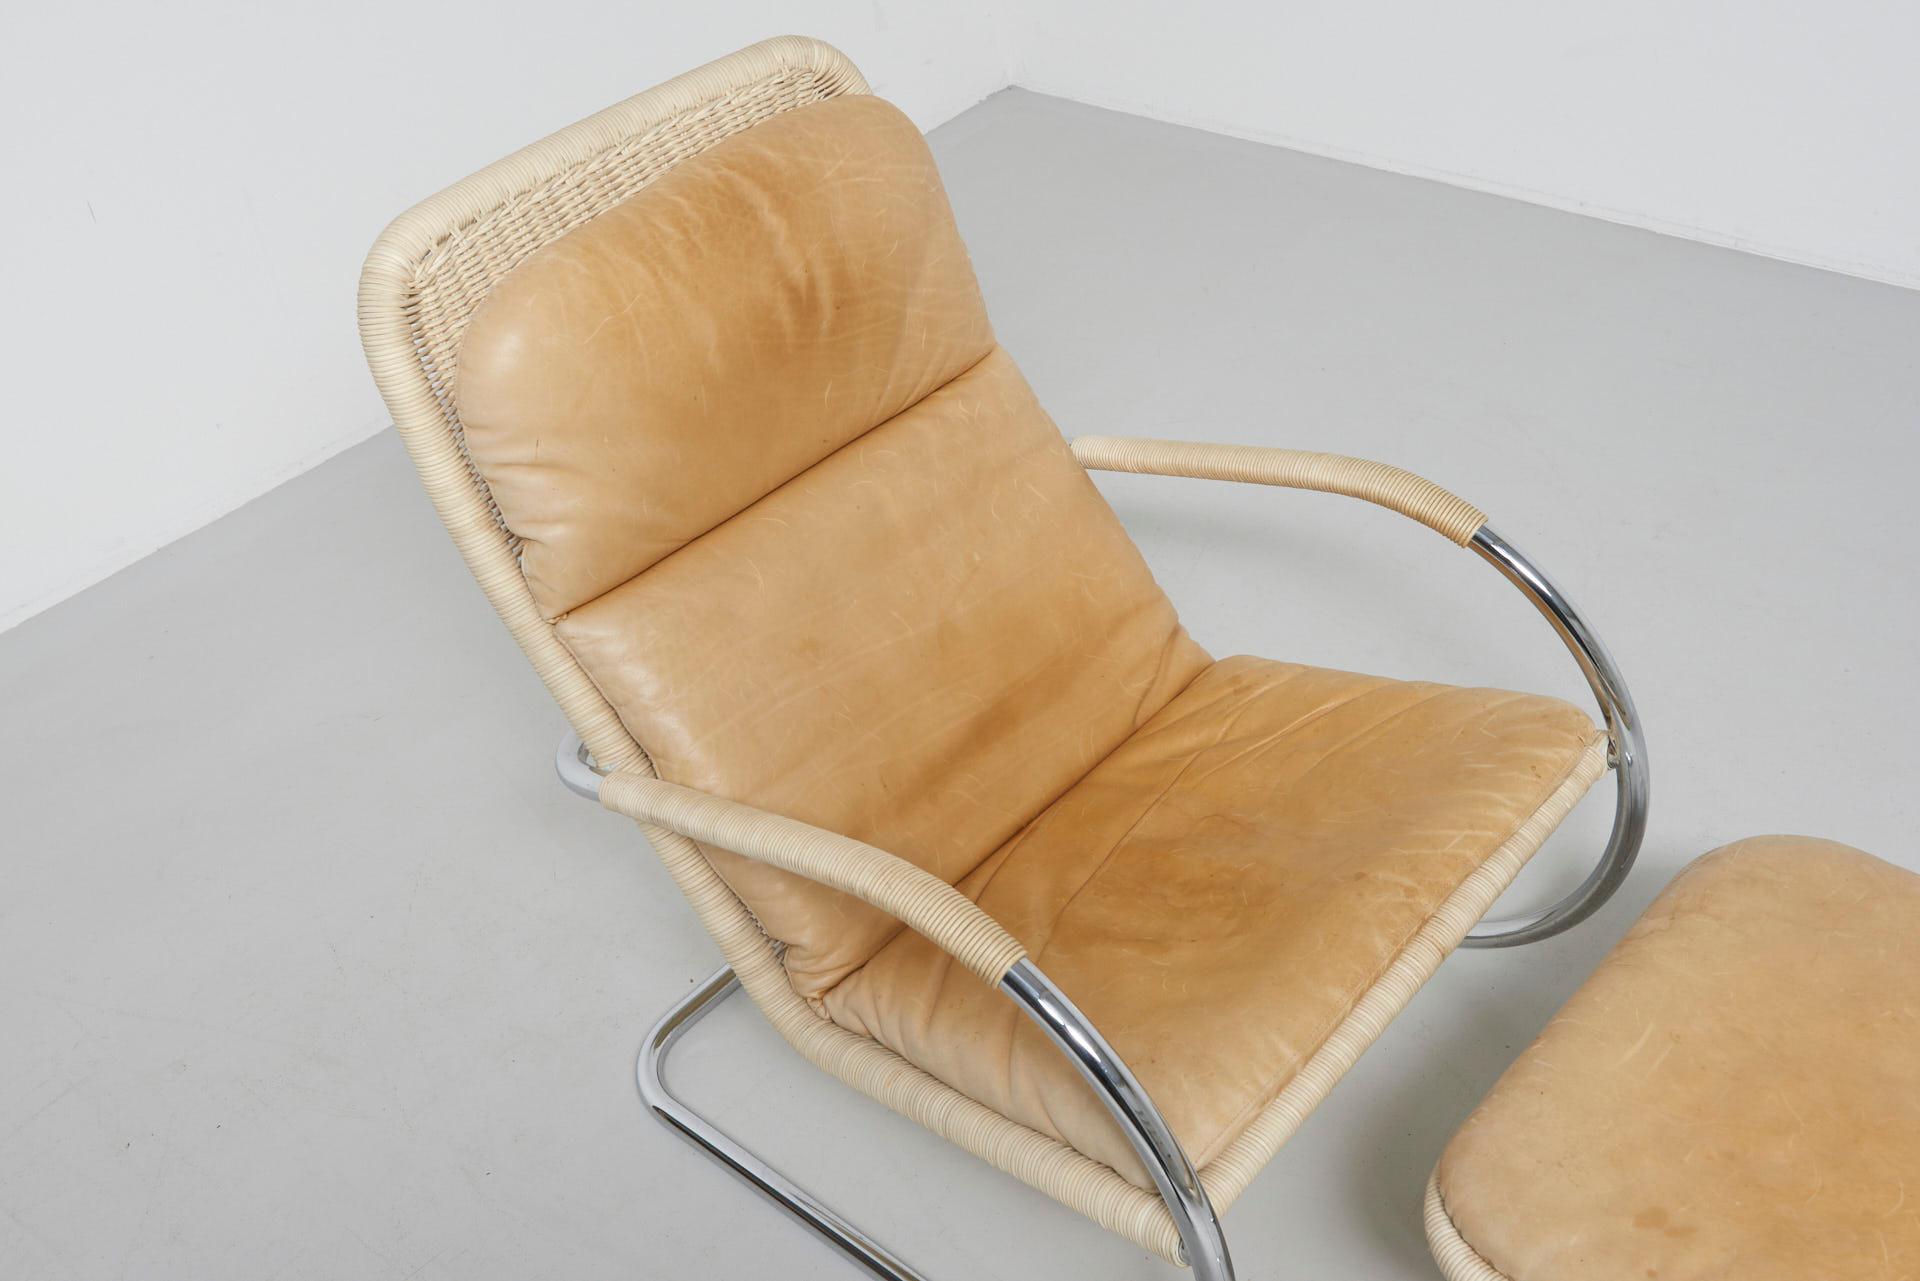 Tubular Lounge Chair with Ottoman by Tecta (Mitte des 20. Jahrhunderts)